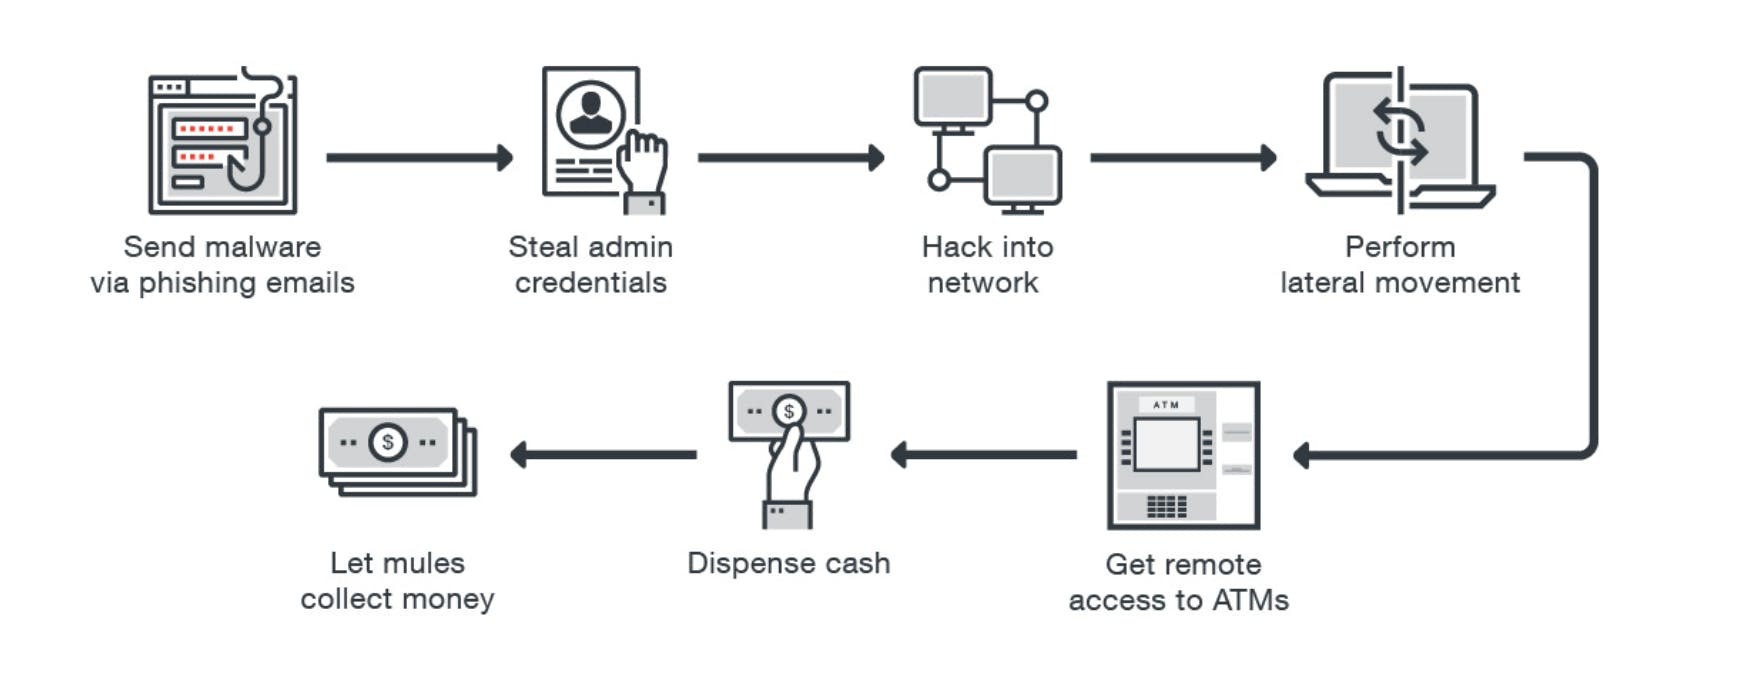 atm network-based attacks steps for hackers